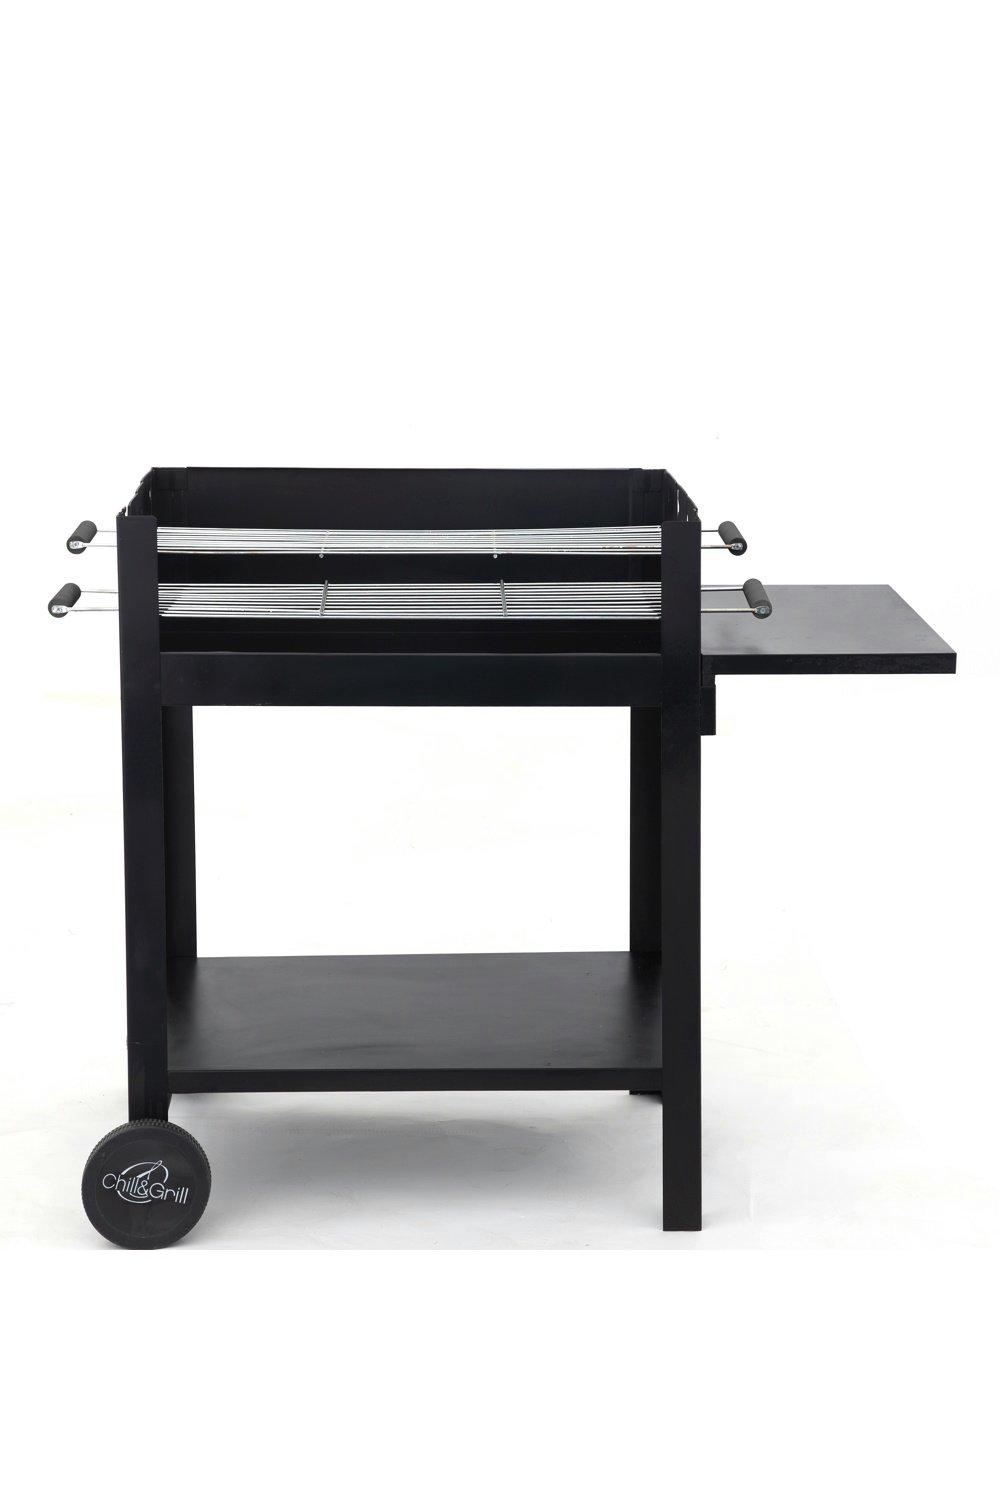 Easy Assembly Lambada Charcoal BBQ Grill with No Screws Required